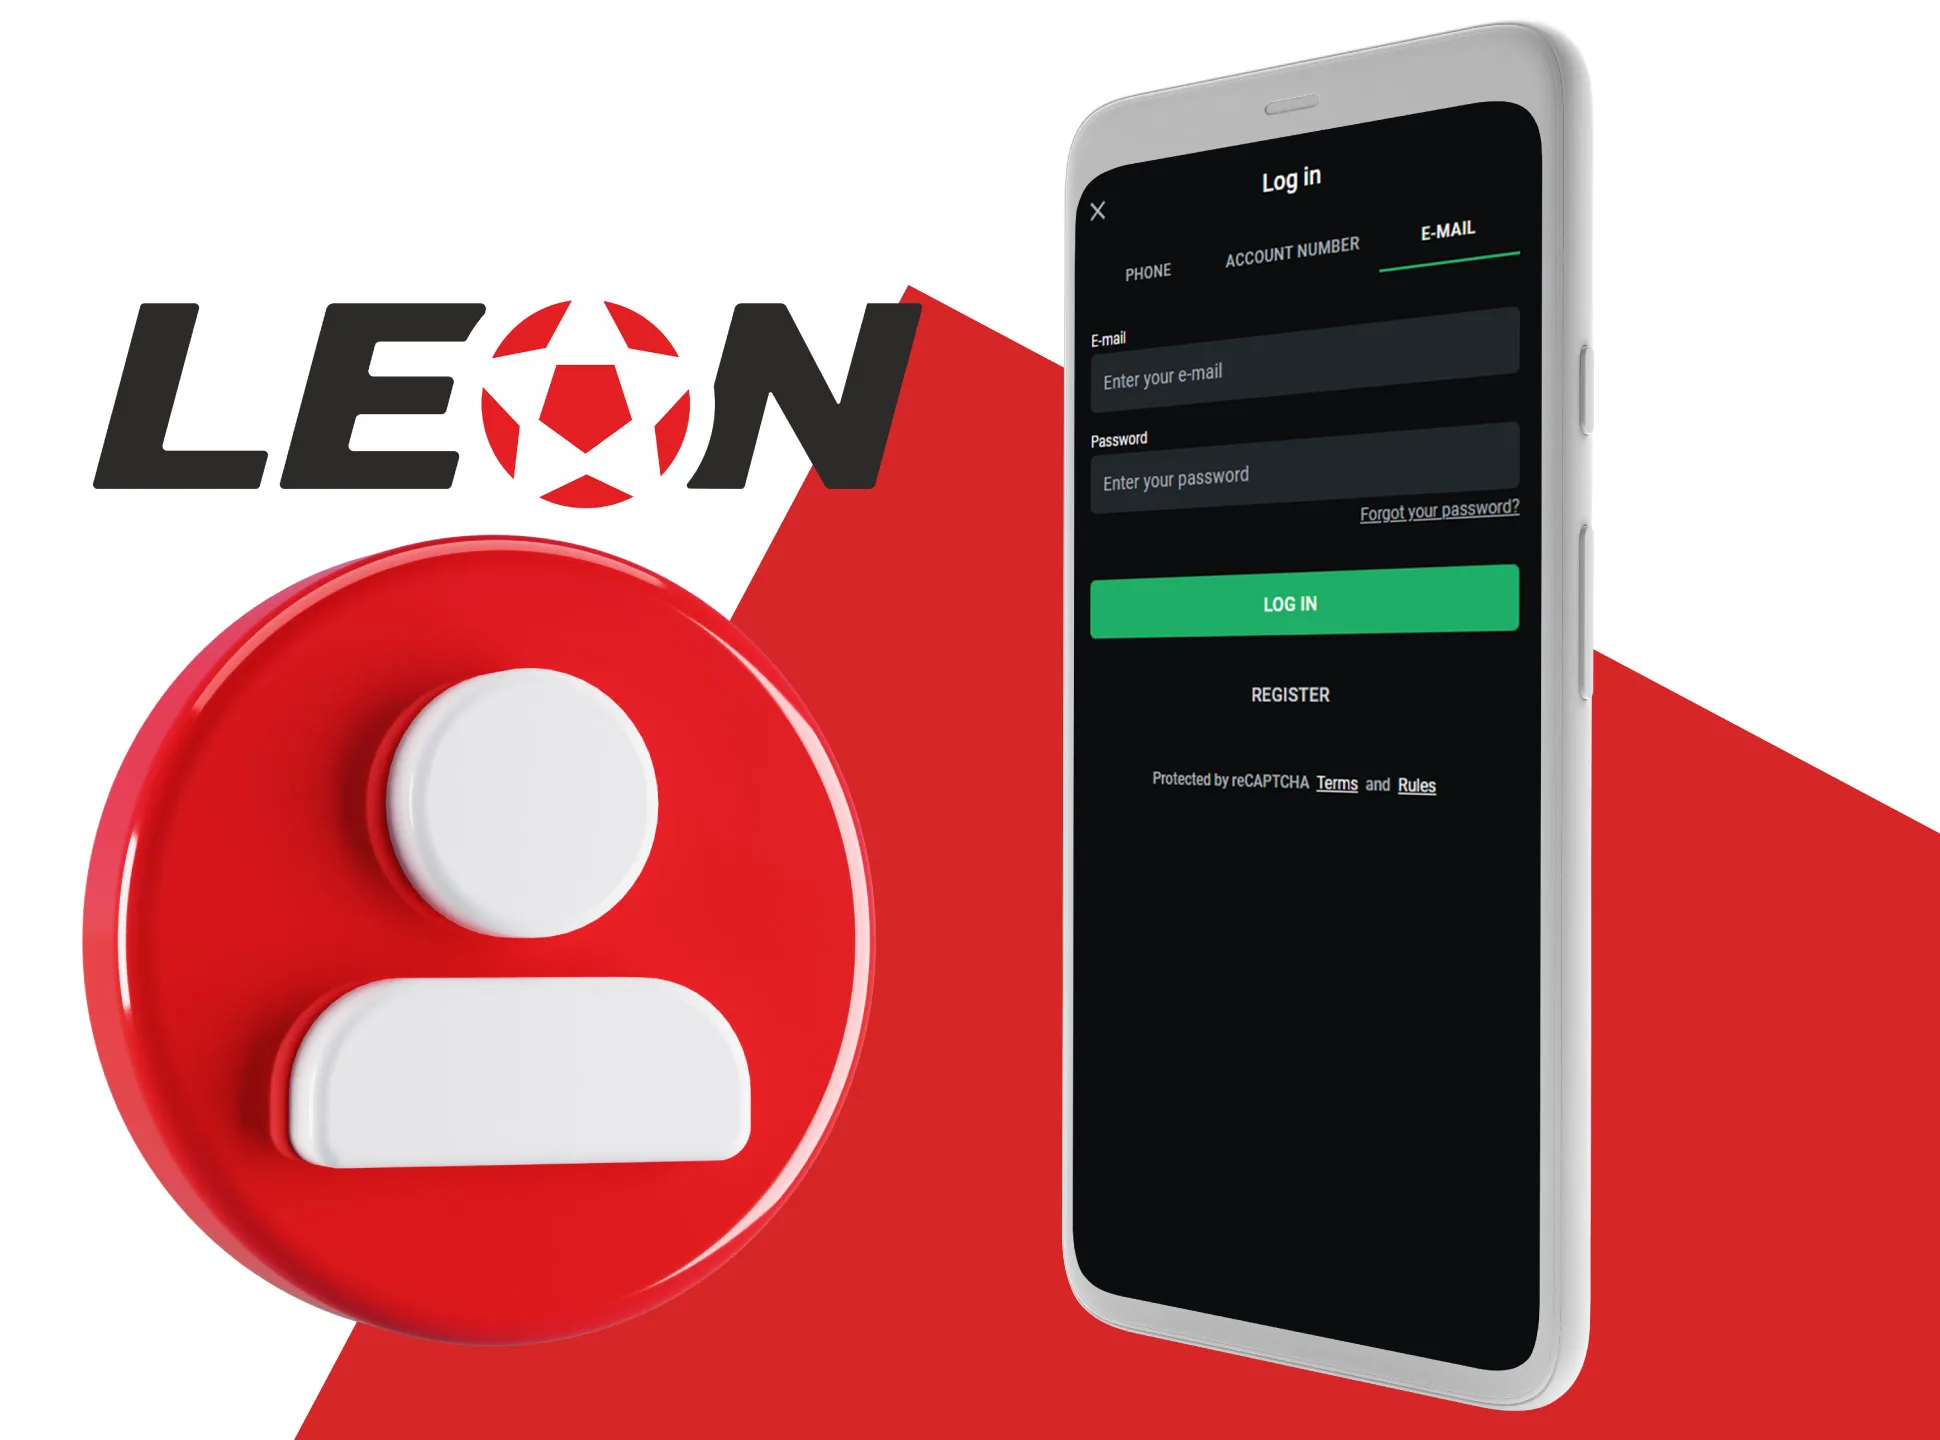 Log to the Leonbet app using your account.